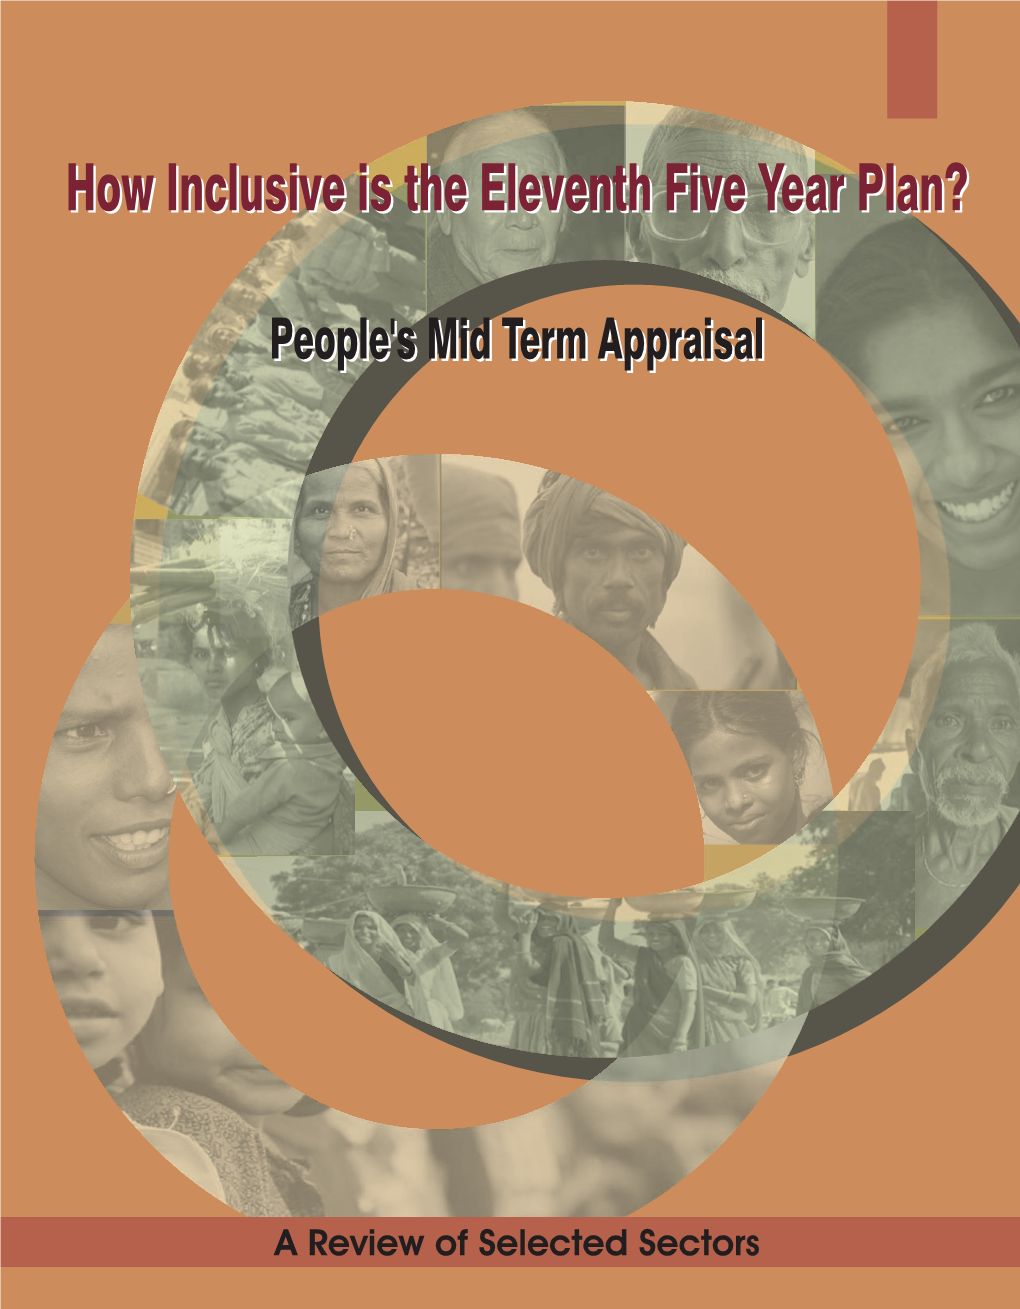 How Inclusive Is the Eleventh Five Year Plan